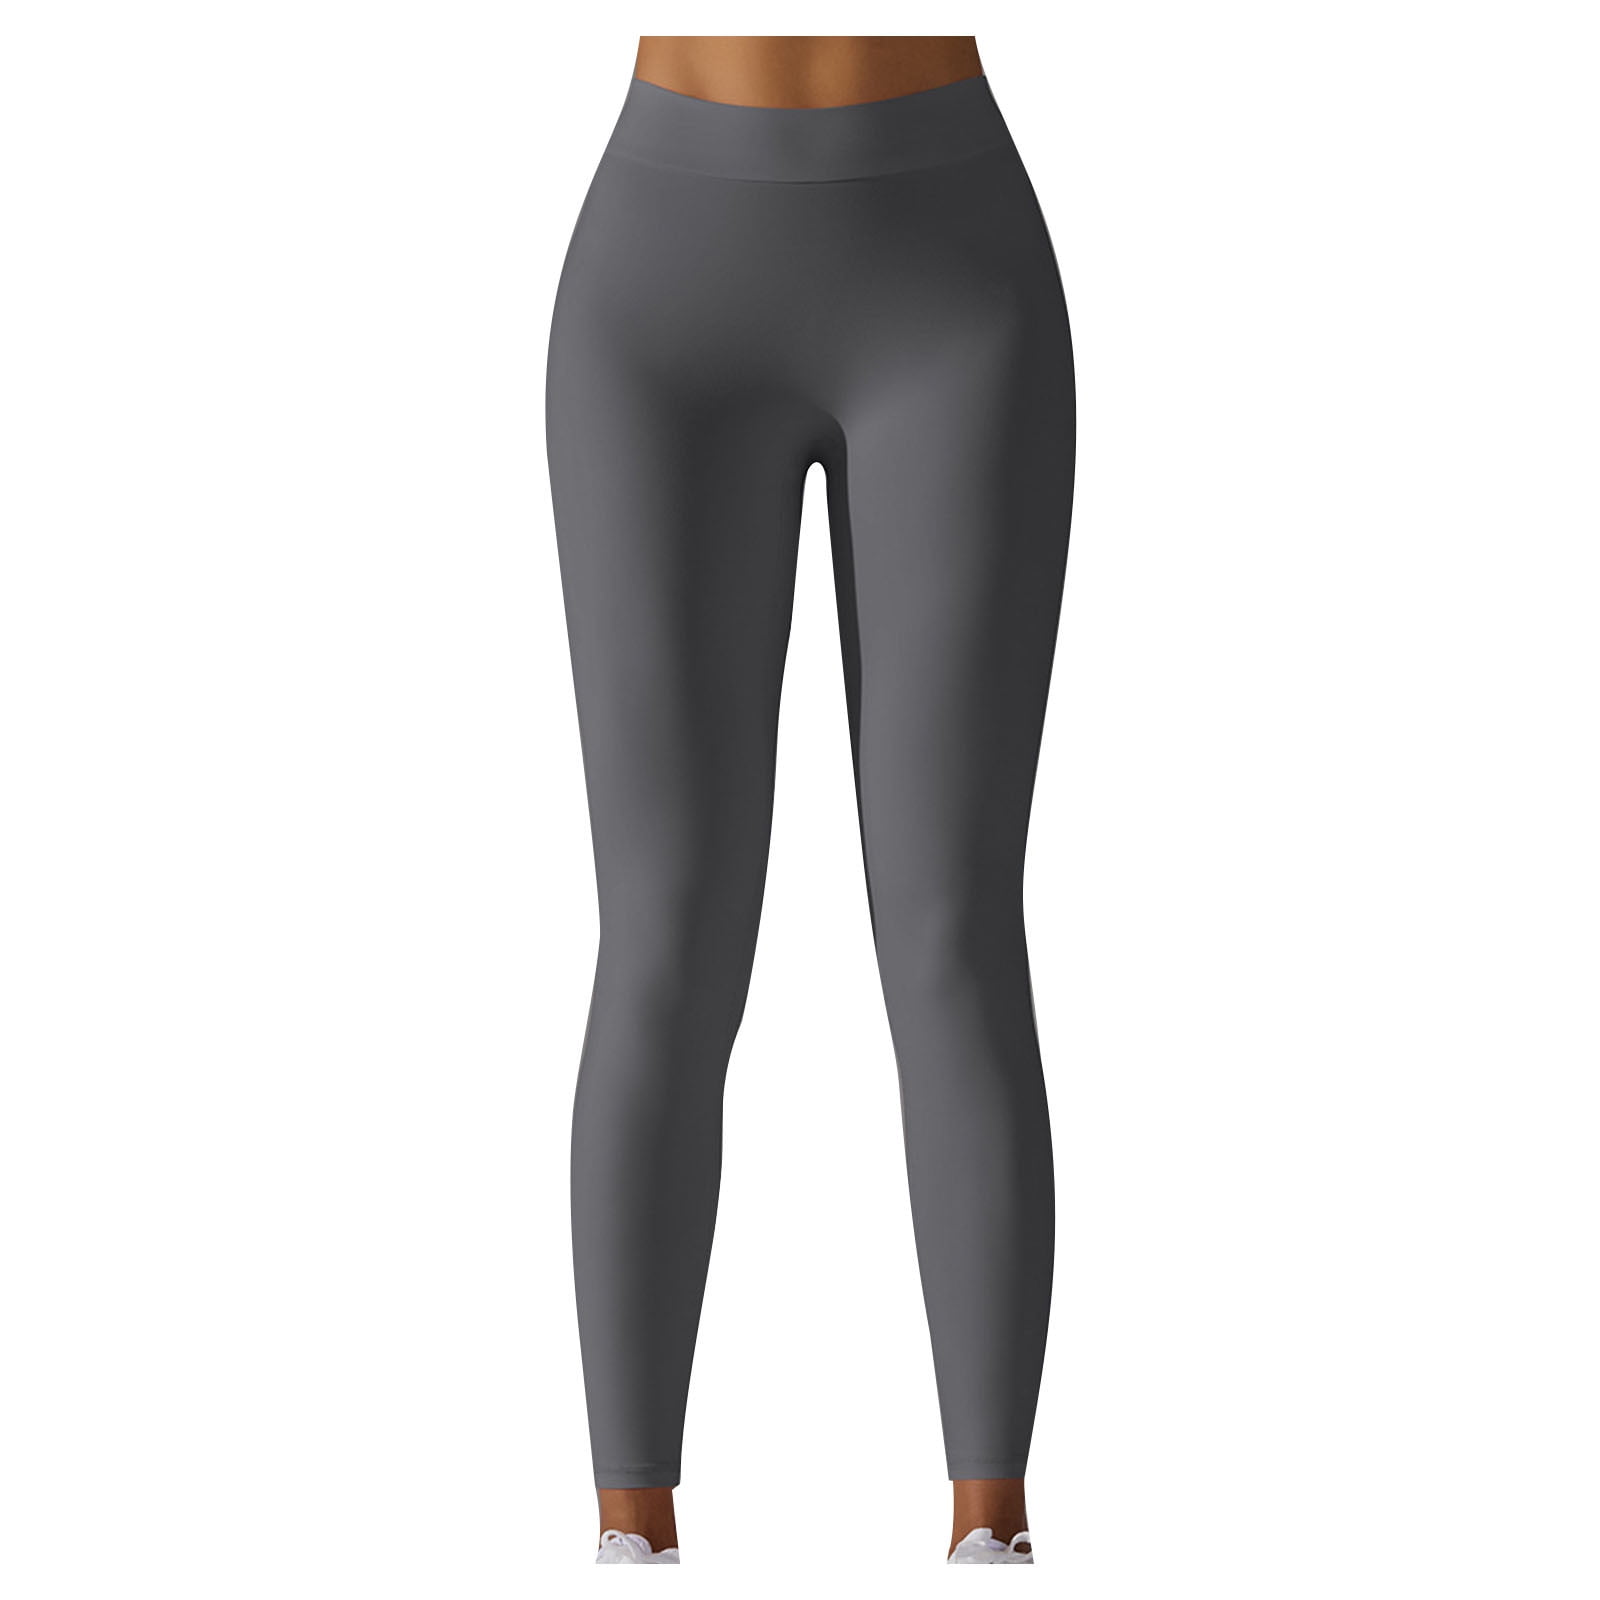 XXL Leggings Women Butt Lifting Workout Tights Plus Size Sports High Waist  Yoga Pants 92% Polyester And 8% ElastenWaist(29.92)Hip(39.37)Pant  Length(36.61)Weight(200G) Indoor Outdoor Home Gym Black 